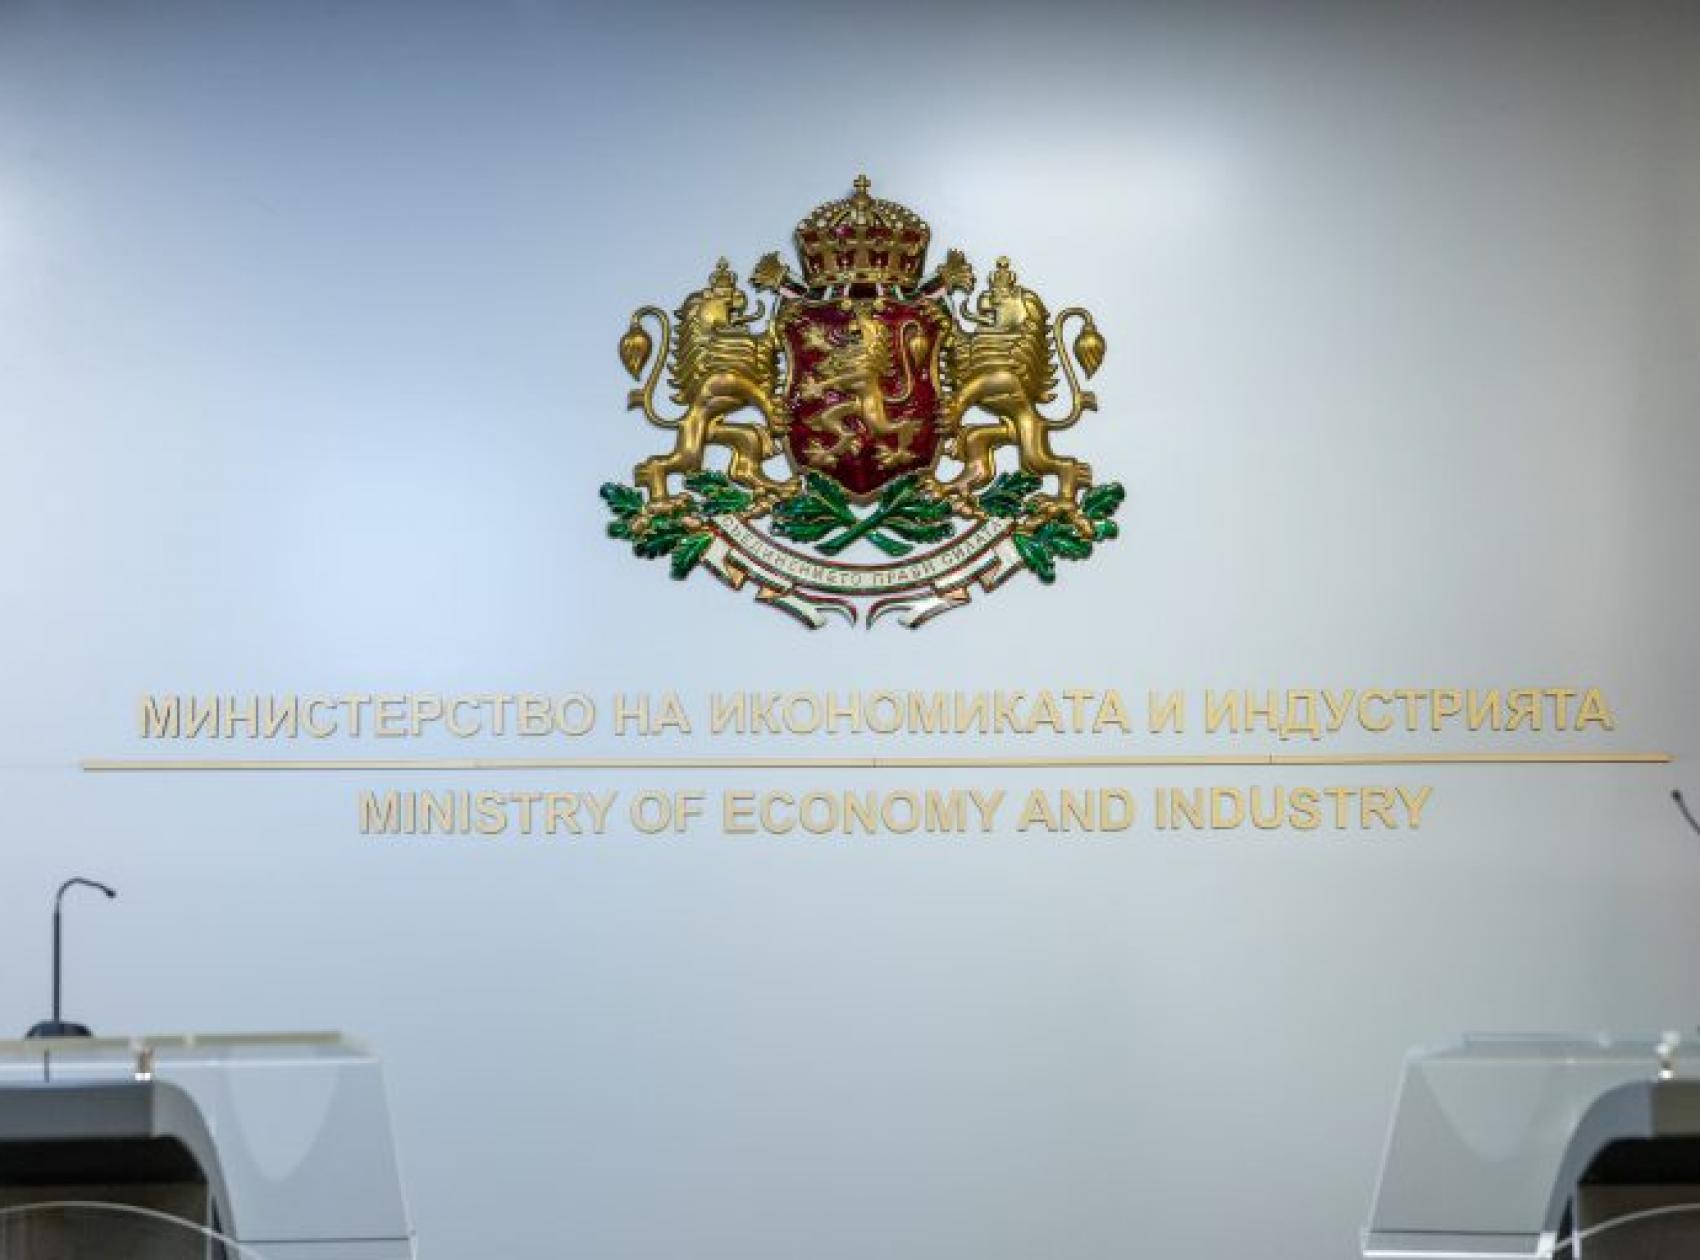 The Ministry of Economy and Industry launched a survey on